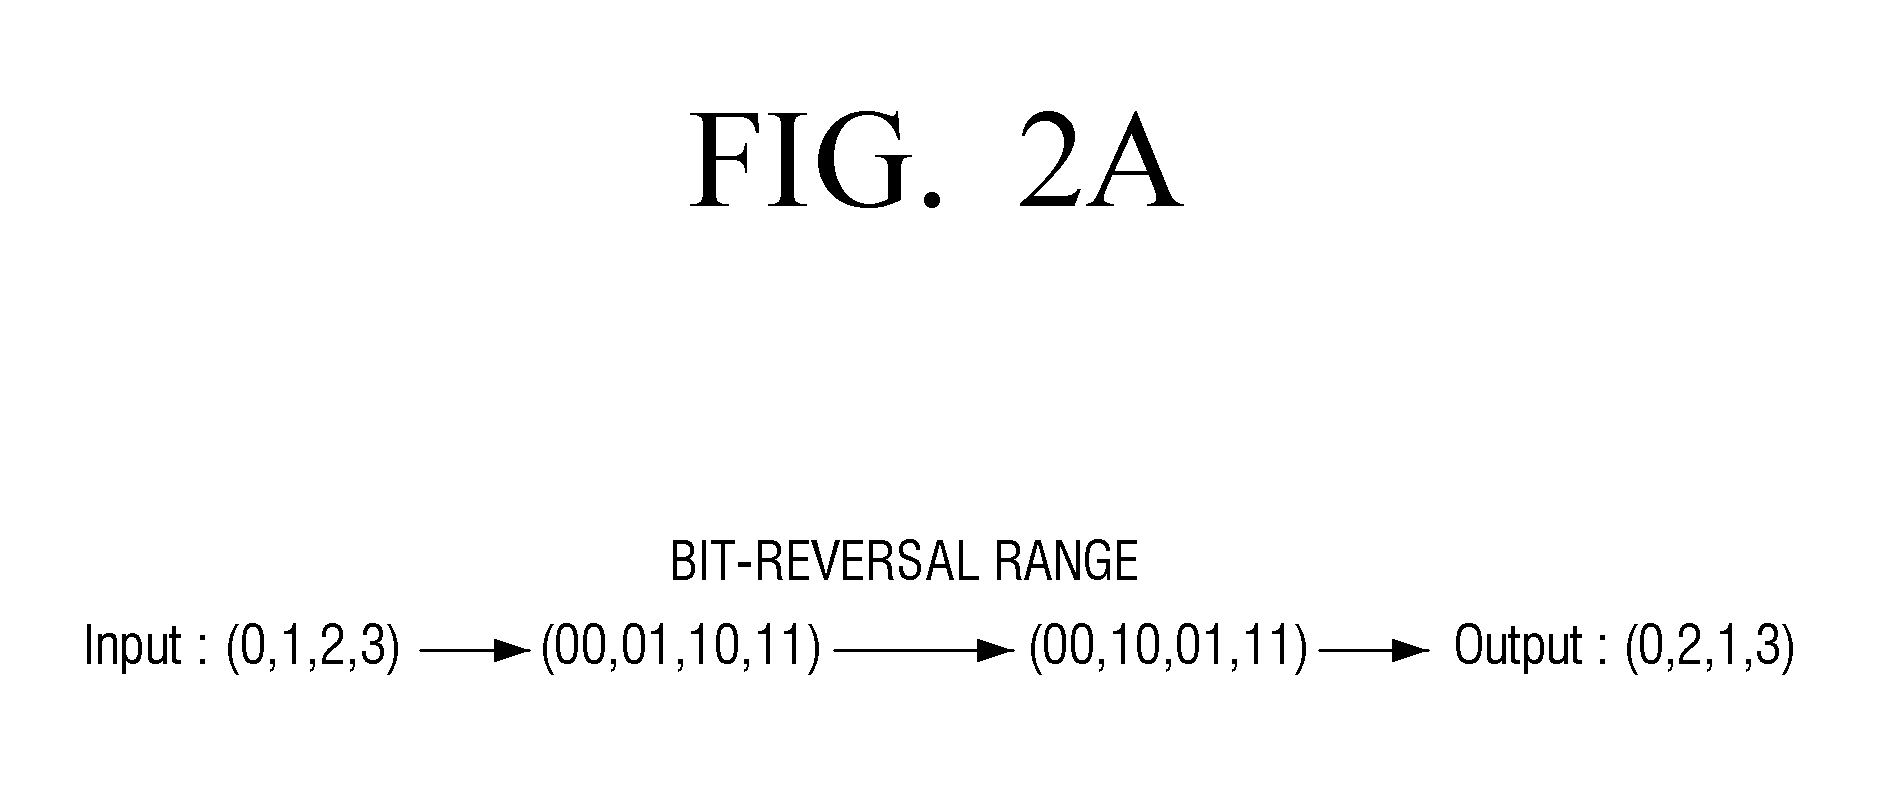 Interleaving and puncturing apparatus and method thereof